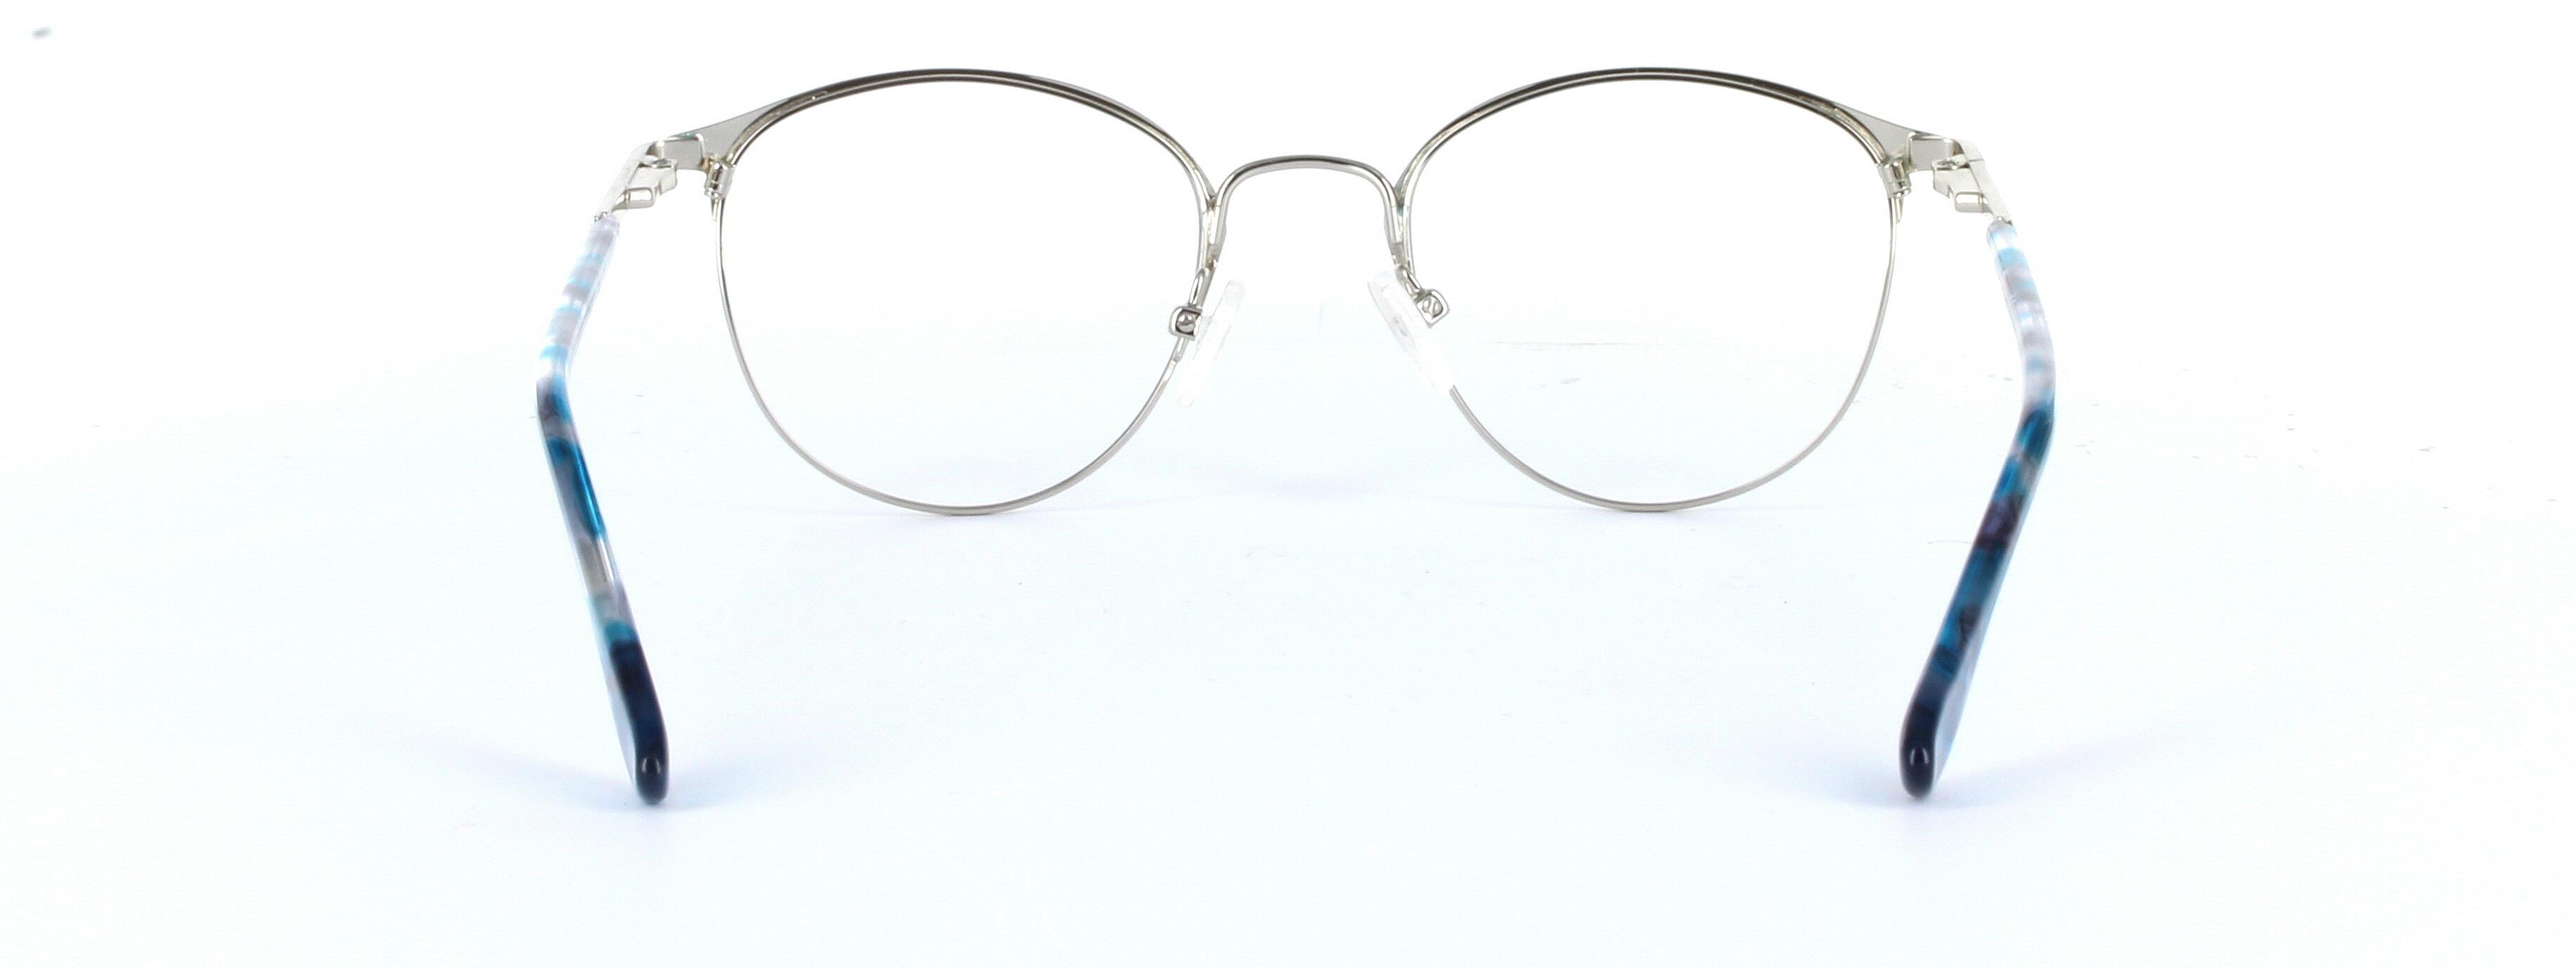 Mia Blue and Silver Full Rim Oval Round Metal Glasses - Image View 3